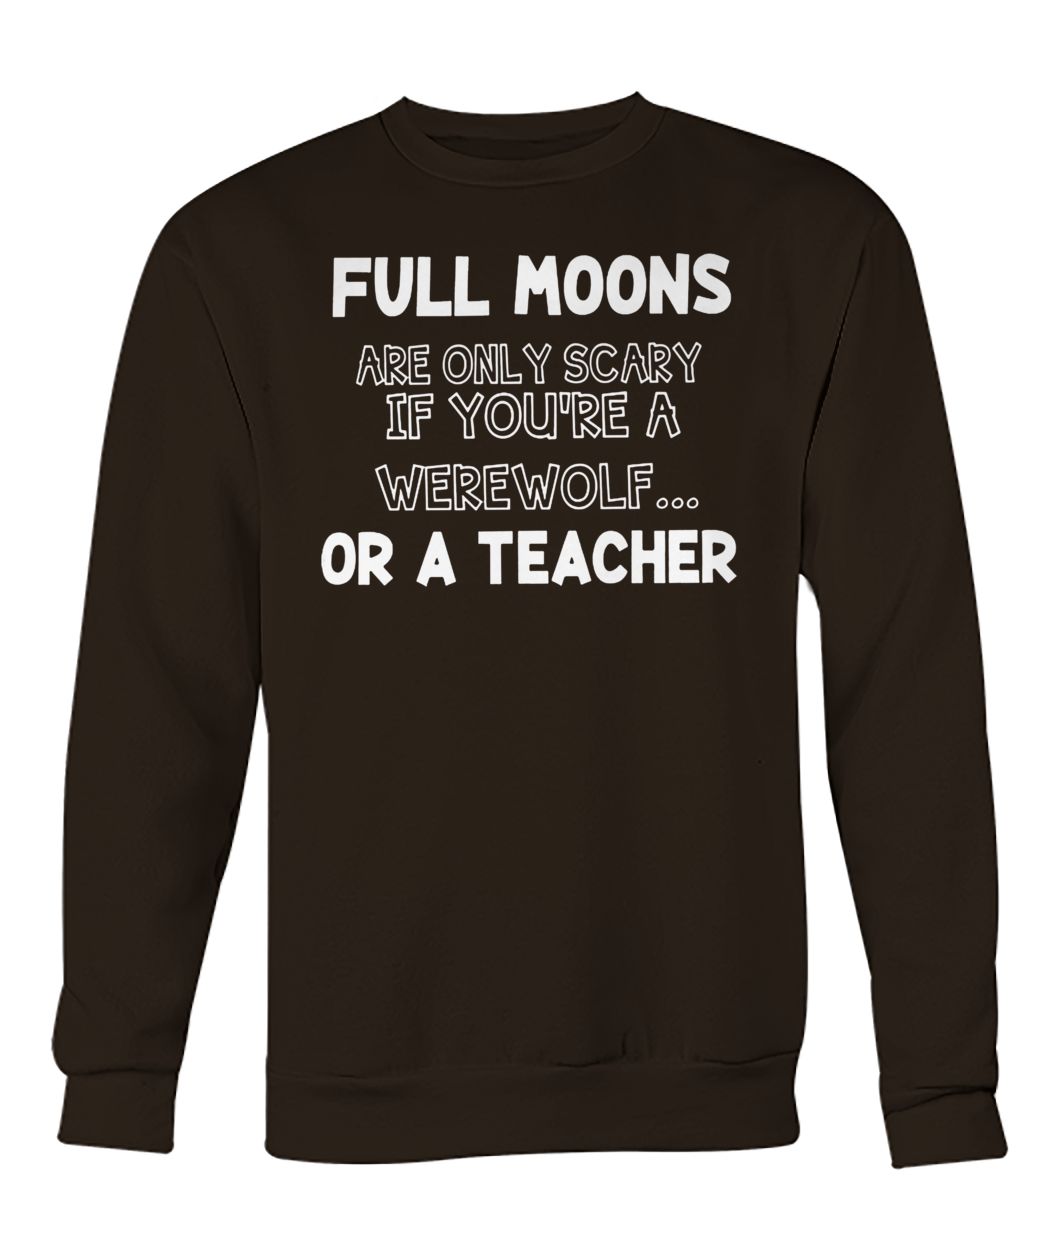 Full moons are only scary if you're a werewolf or a teacher crew neck sweatshirt